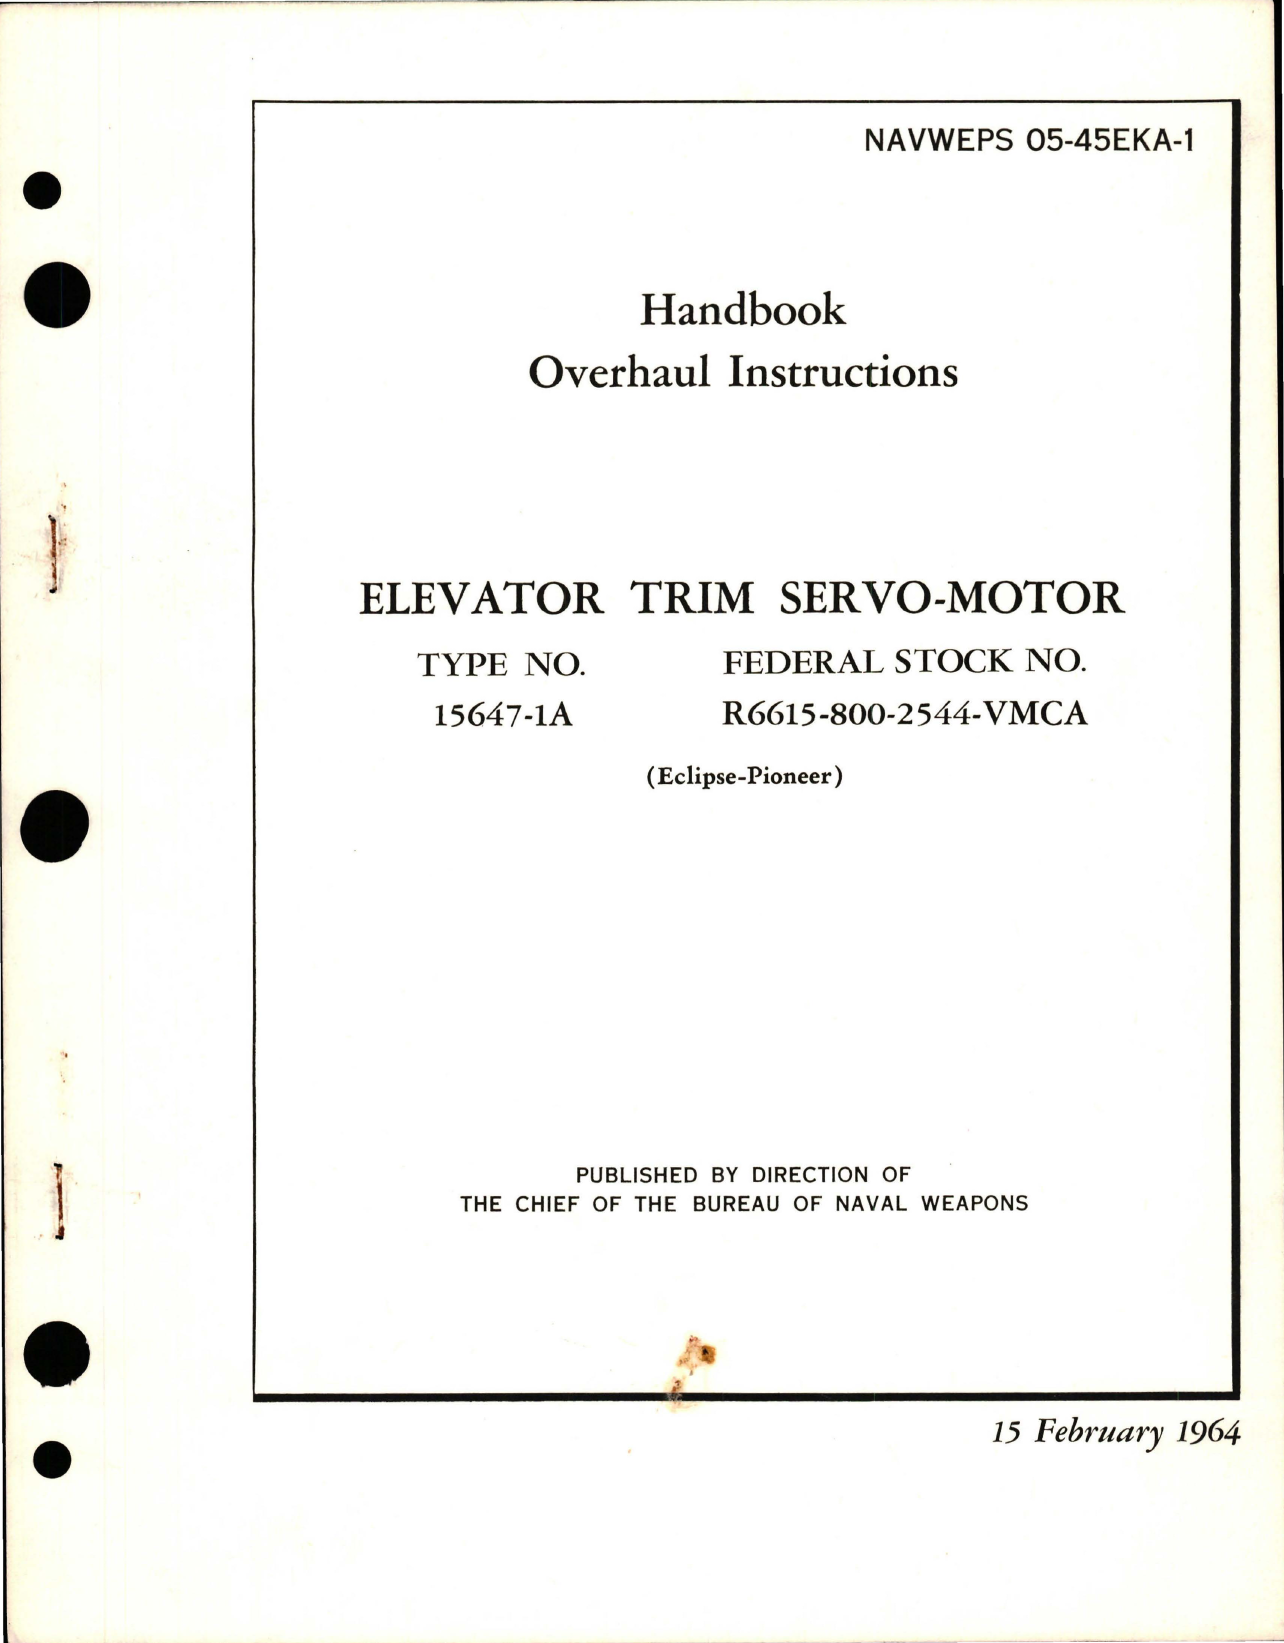 Sample page 1 from AirCorps Library document: Overhaul Instructions for Elevator Trim Servo-Motor - Type 15647-1A